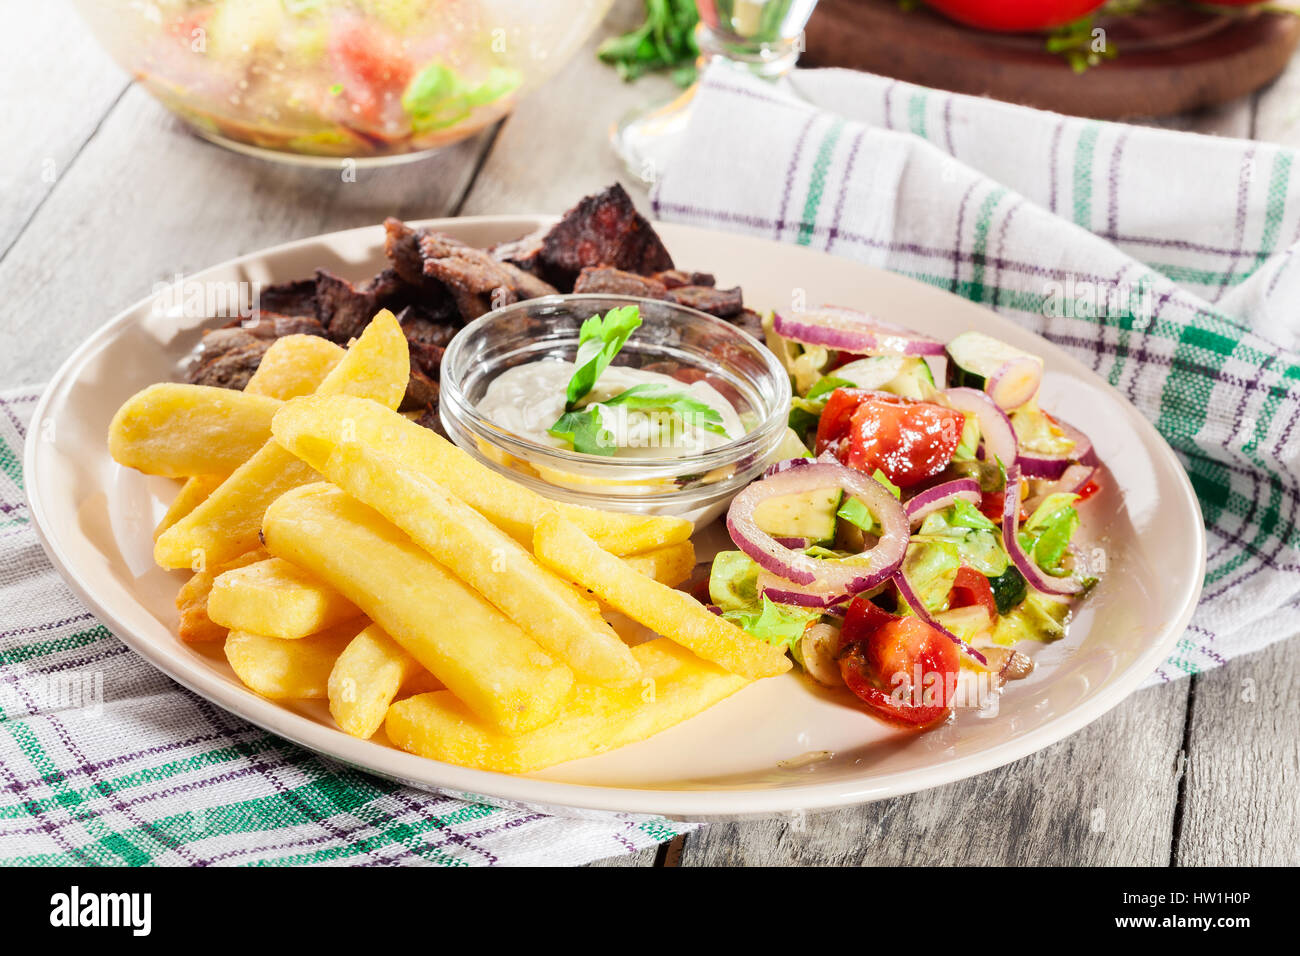 Grilled meat with French fries and fresh vegetables on a plate Stock Photo